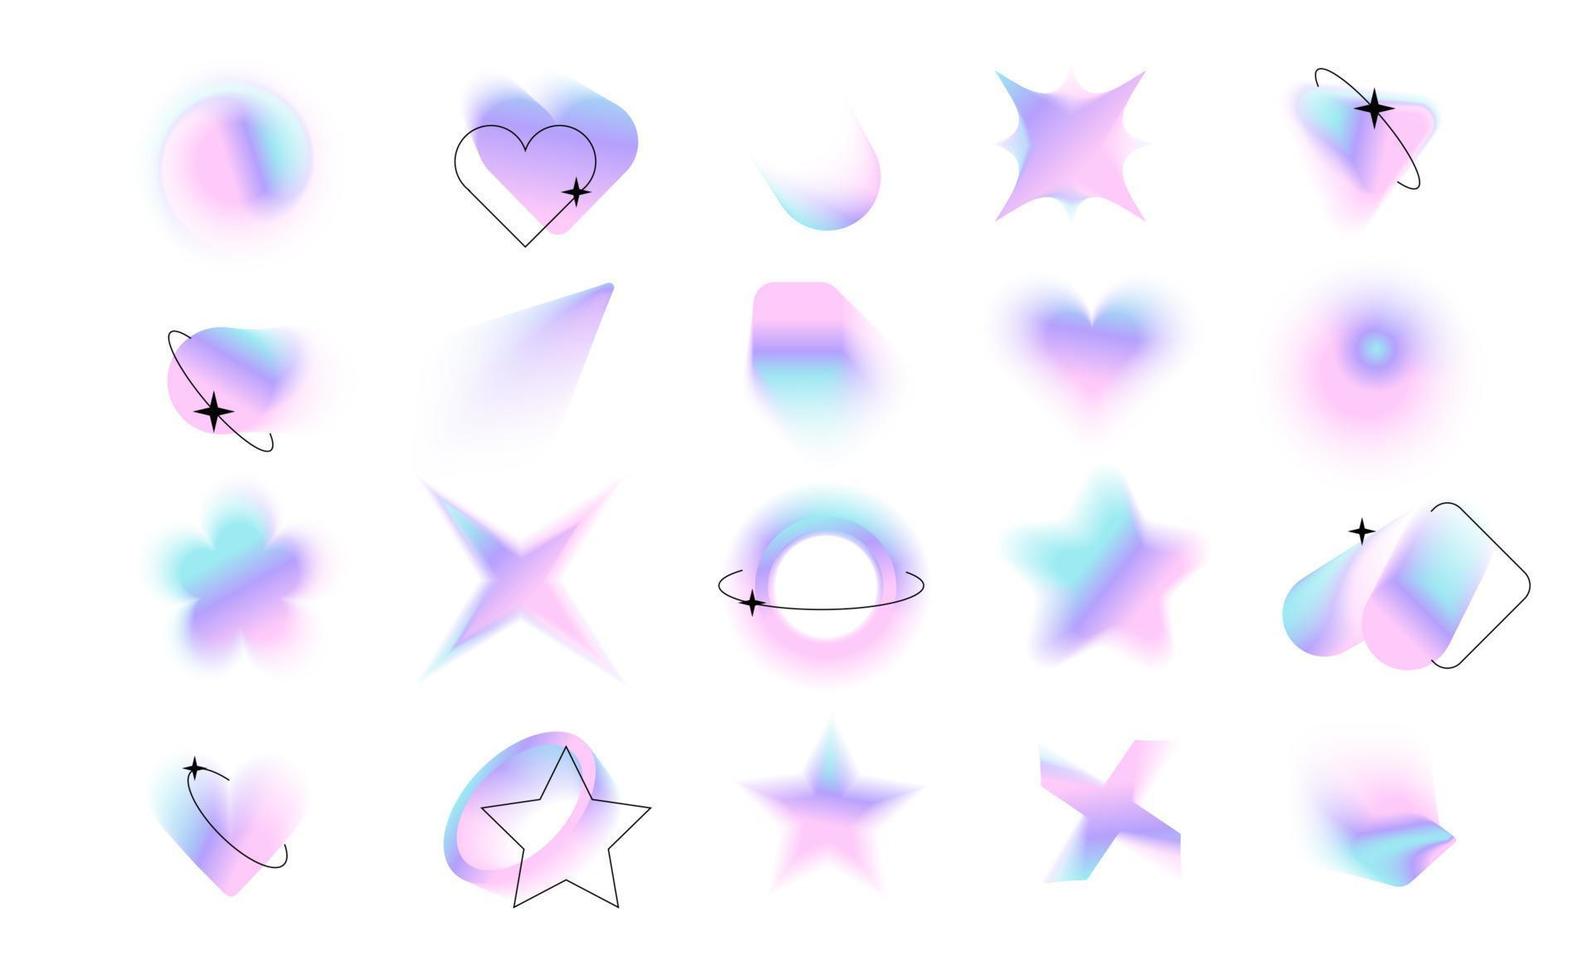 Blurred gradient holographic shapes set with black linear forms and sparkles.Big blurry aura aesthetic elements collection in y2k style. Modern minimalist design element with blur effect. eps10 vector